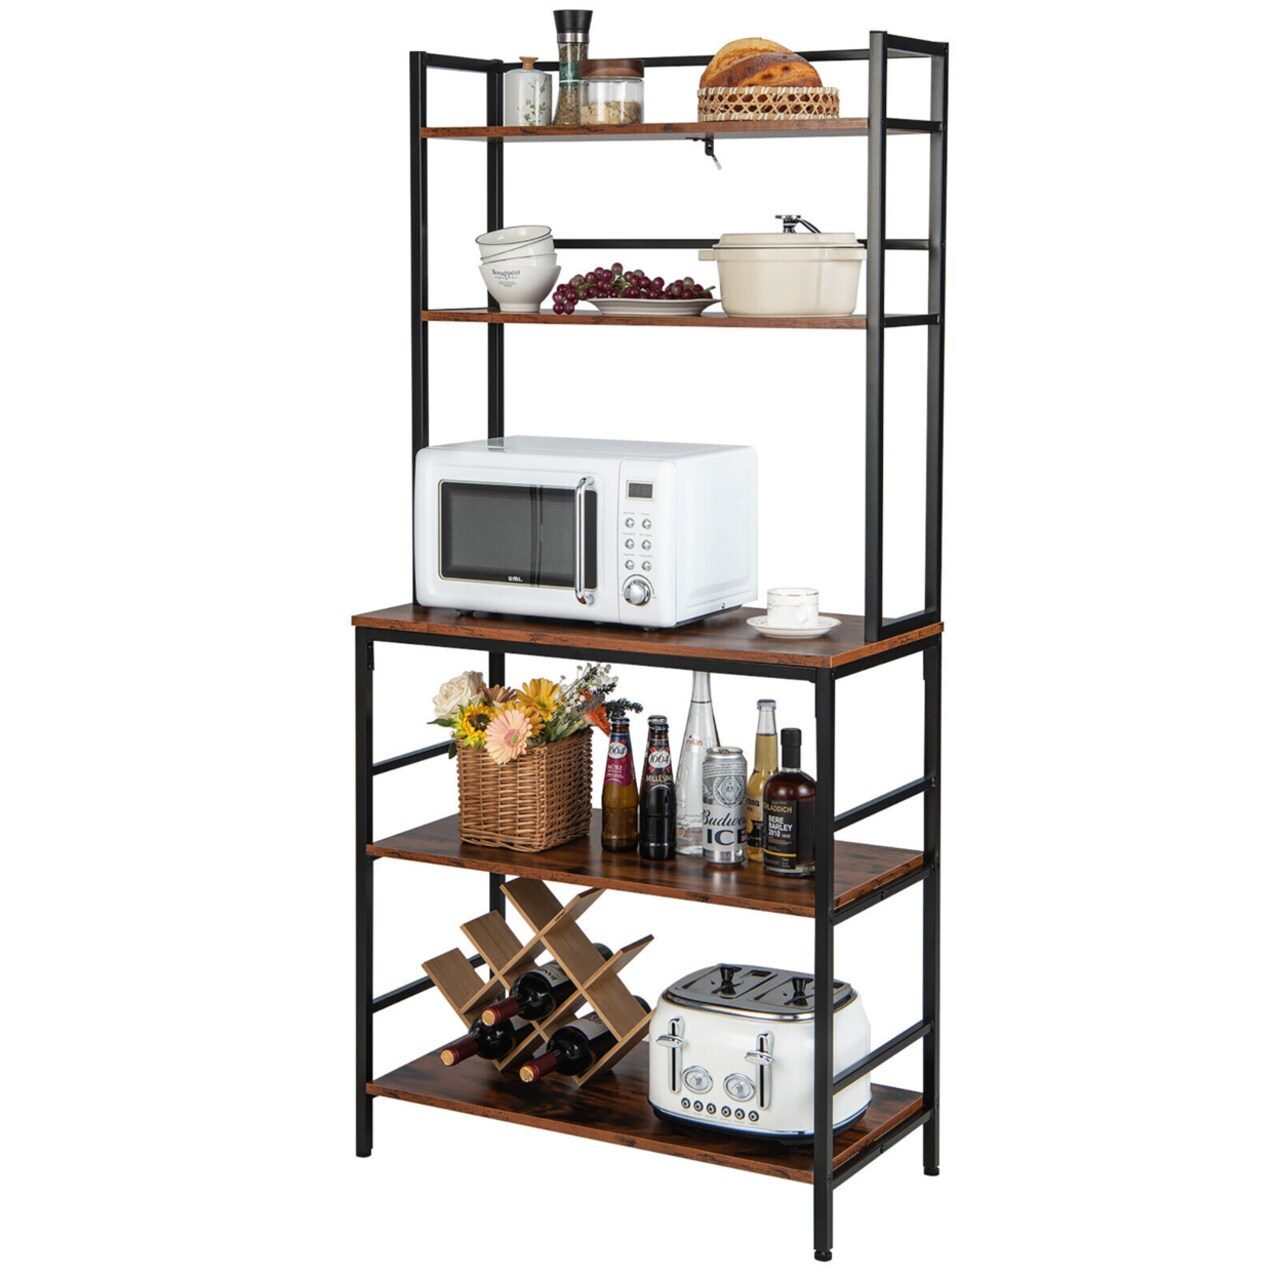 Gymax 5-Tier Kitchen Bakers Rack Microwave Stand Utility Storage